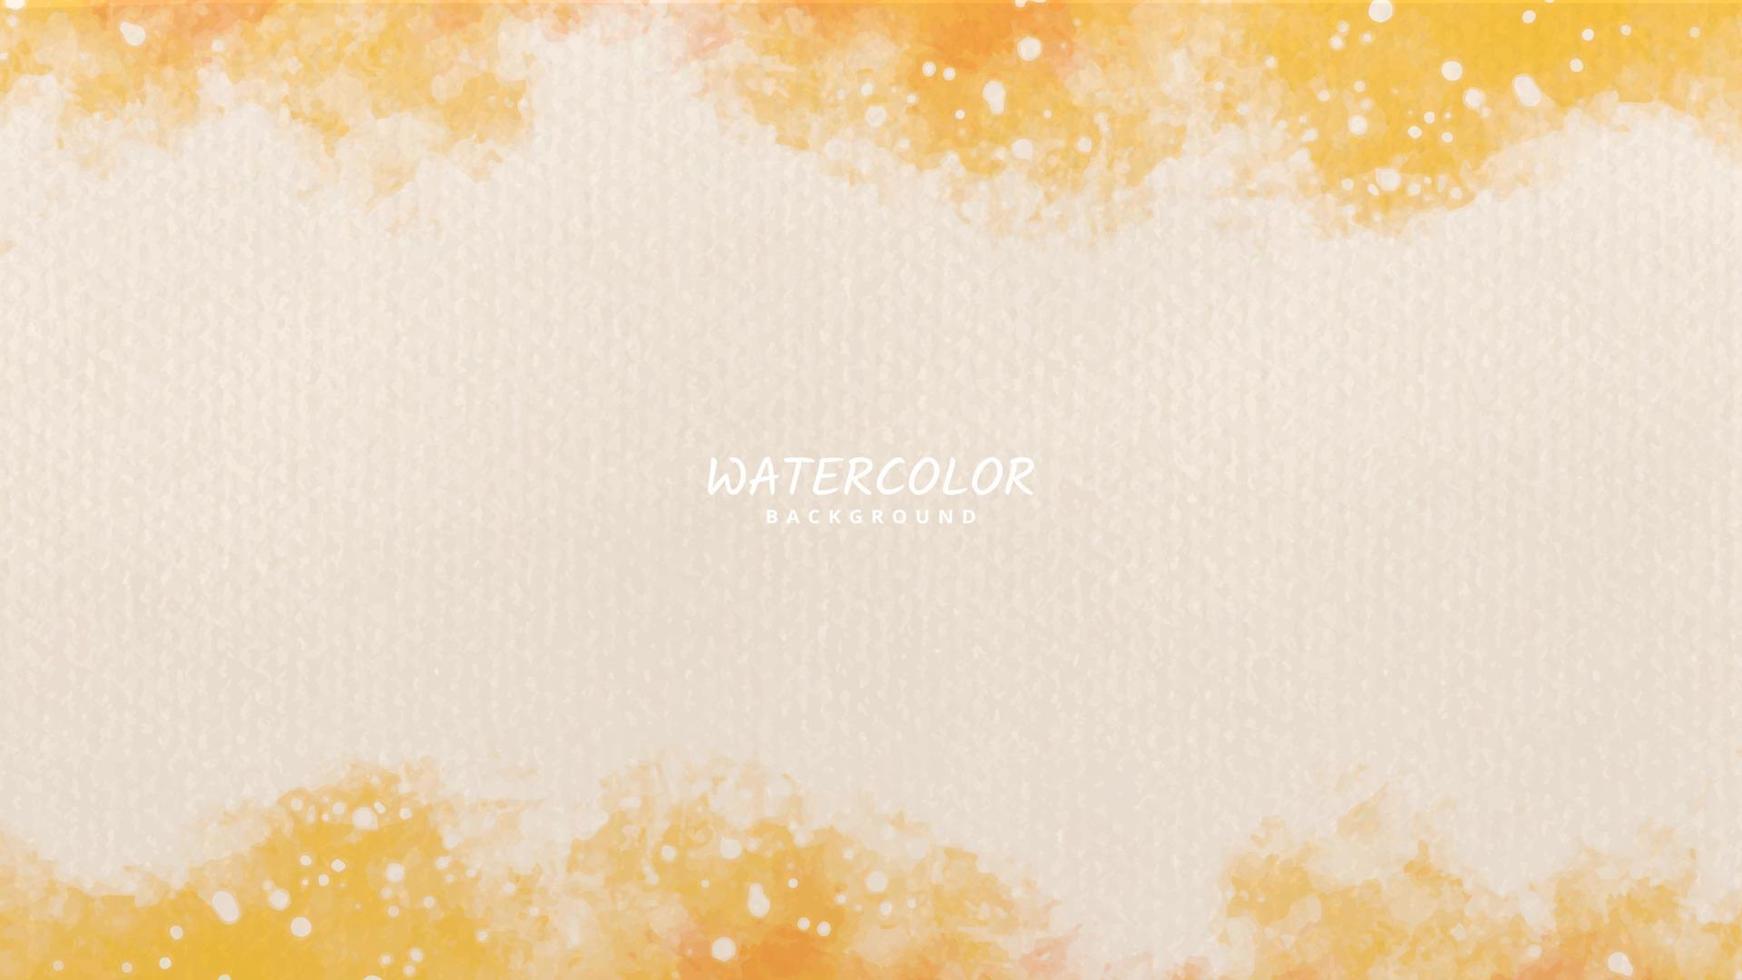 watercolor background with paper texture and white space for text vector